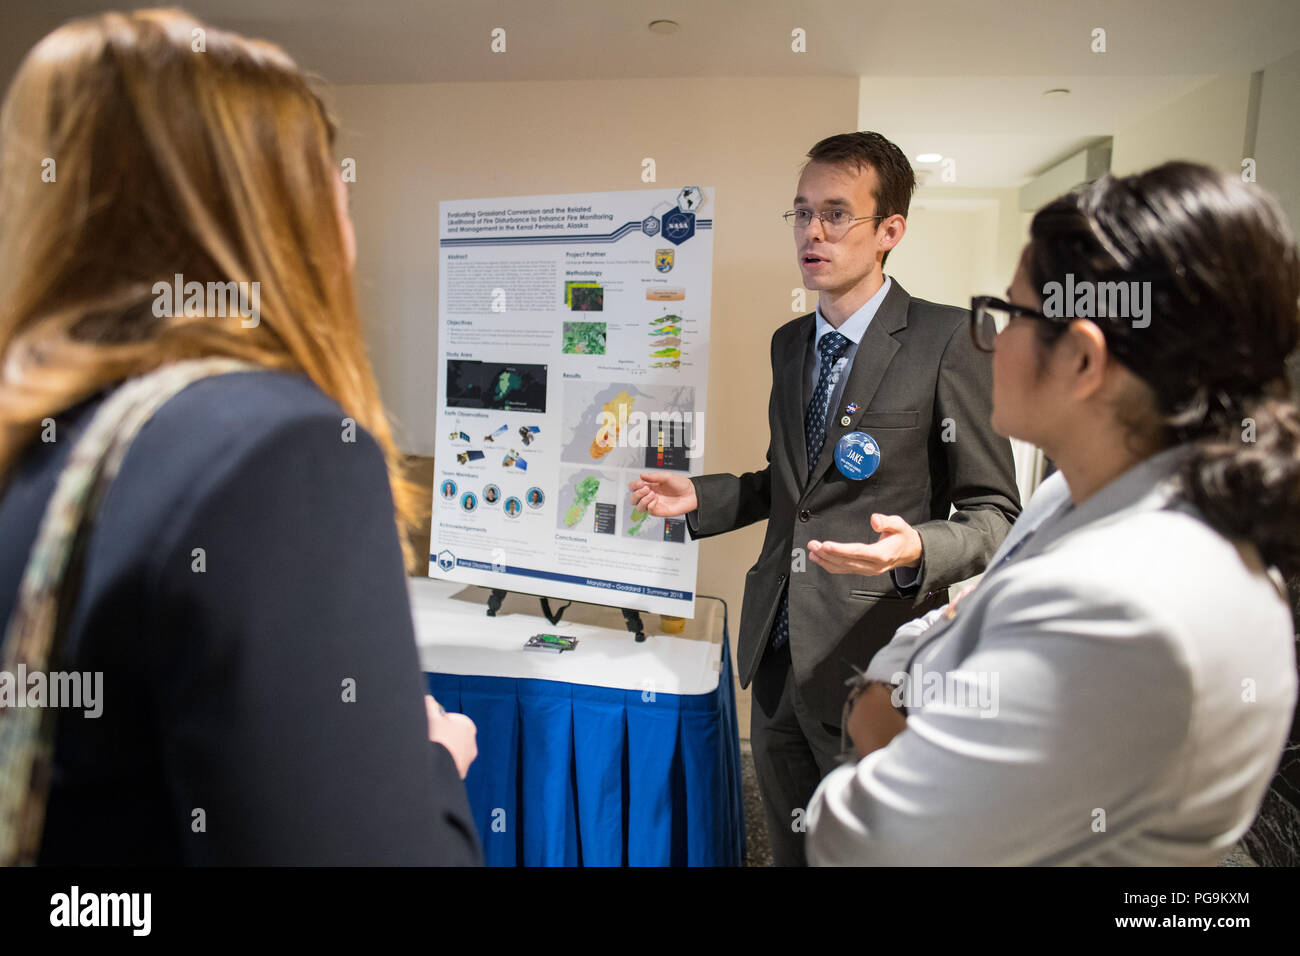 Students and young professionals discuss their projects at the Earth Science Applications Showcase Wednesday, August 1, 2018 at NASA Headquarters in Washington. Every summer, participants in NASA’s Applied Sciences’ DEVELOP National Program come to NASA Headquarters and present their research projects. DEVELOP is a training and development program where students work on Earth science research projects, mentored by science advisers from NASA and partner agencies, and extend research results to local communities. Stock Photo